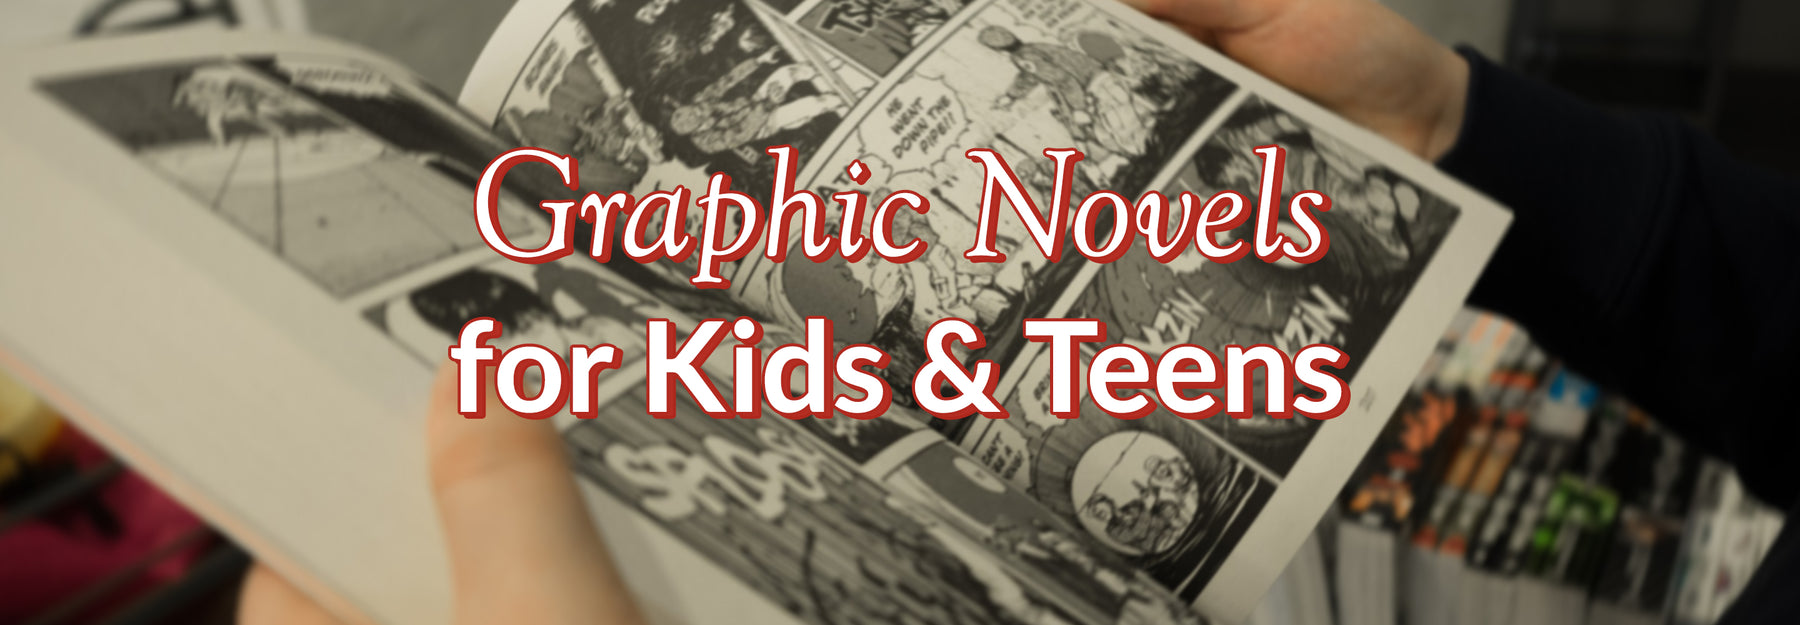 Graphic Novels for Kids & Teens